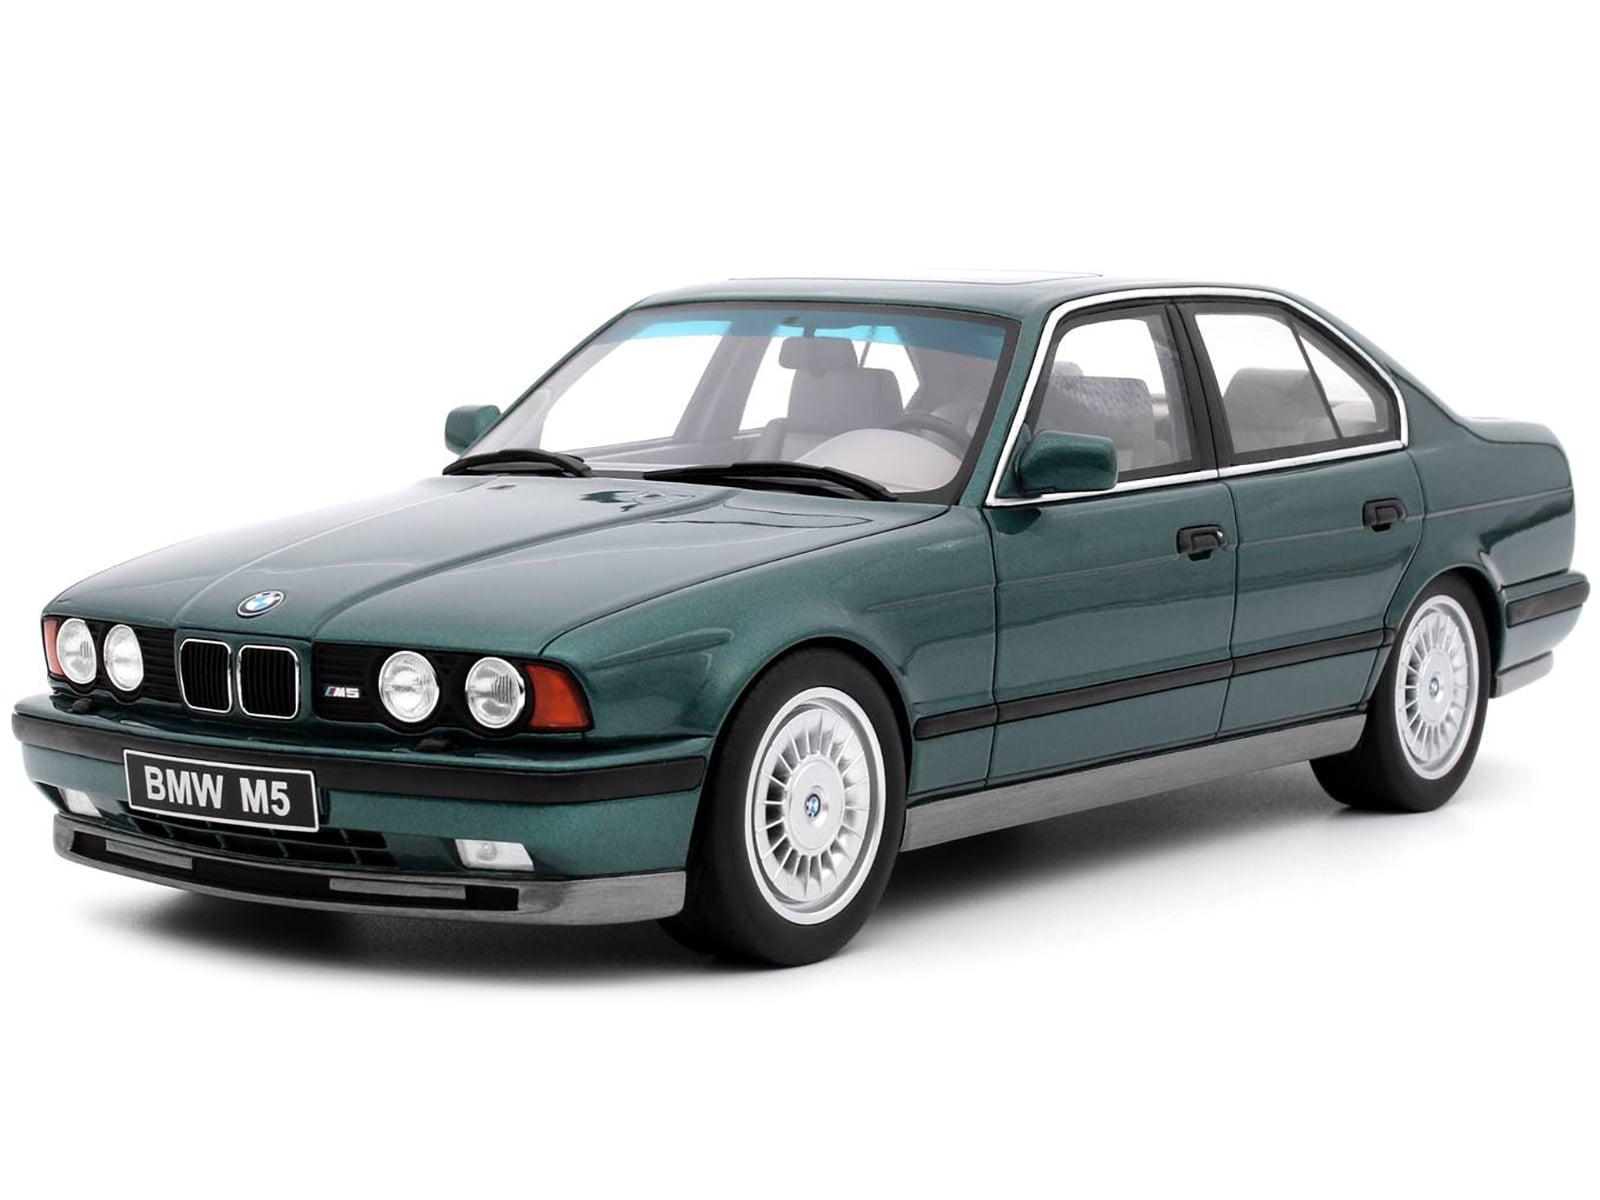 1991 BMW M5 E34 Lagoon Green Metallic Cecotto Limited Edition to 3000  pieces Worldwide 1/18 Model Car by Otto Mobile 